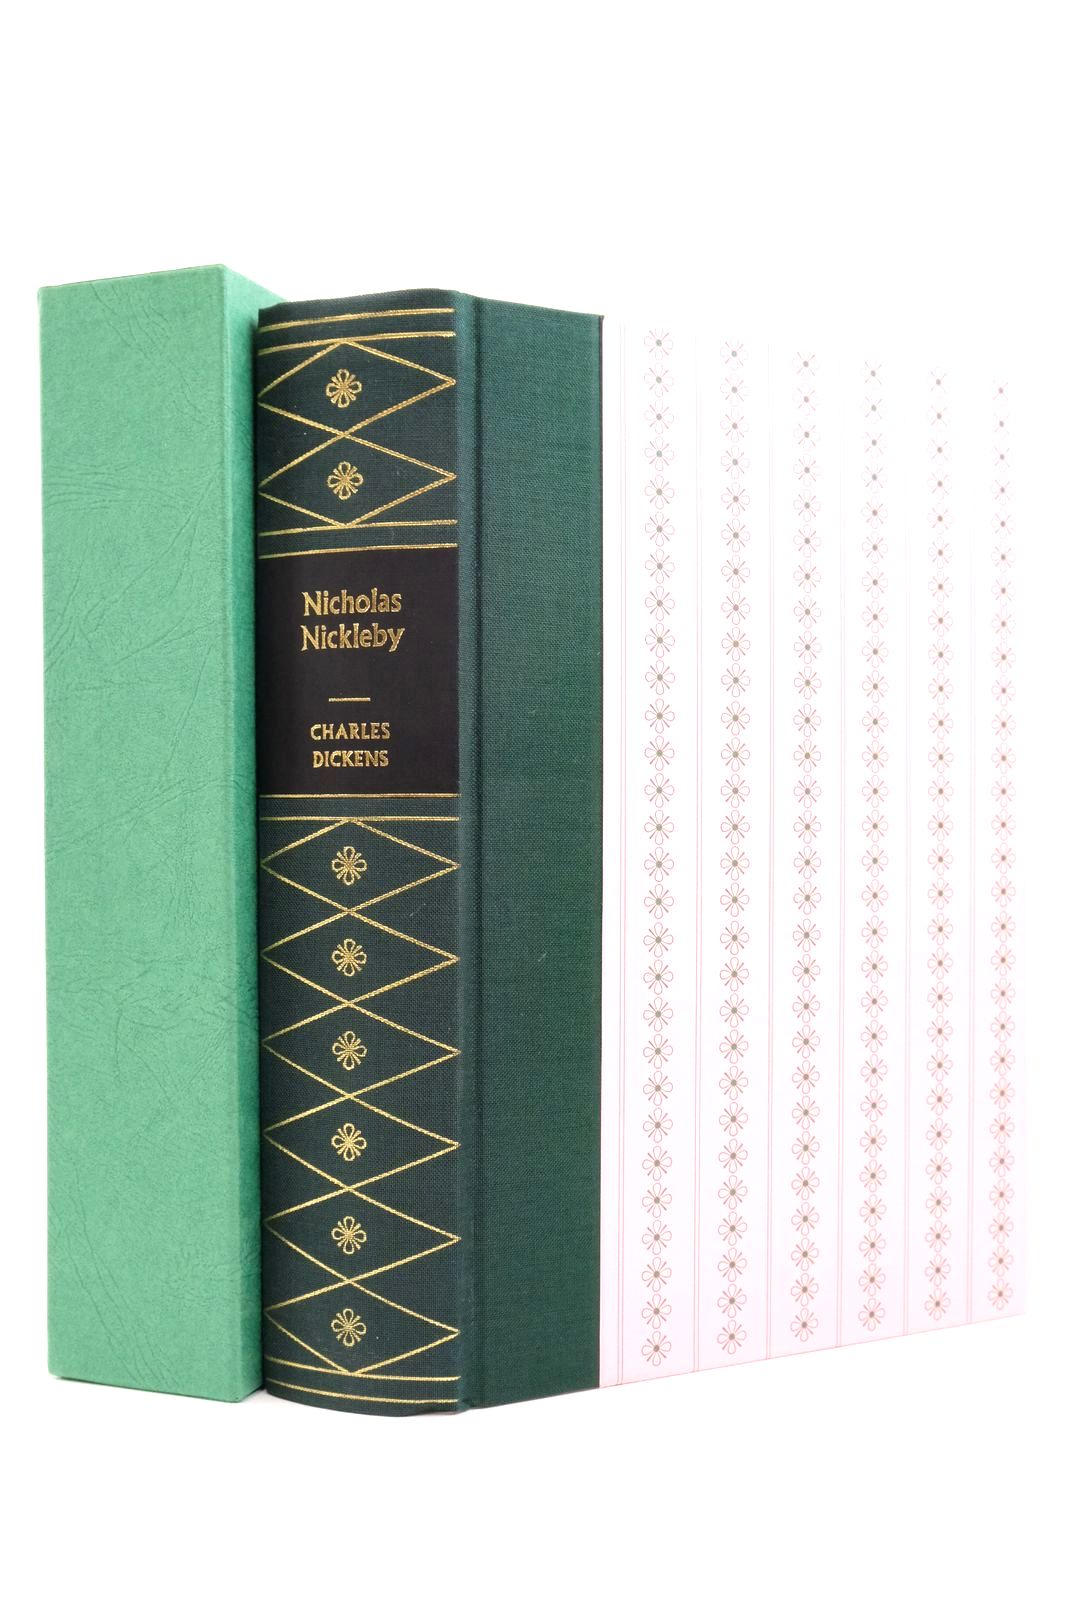 Photo of THE LIFE AND ADVENTURES OF NICHOLAS NICKLEBY written by Dickens, Charles
Hibbert, Christopher illustrated by Keeping, Charles published by Folio Society (STOCK CODE: 2138512)  for sale by Stella & Rose's Books